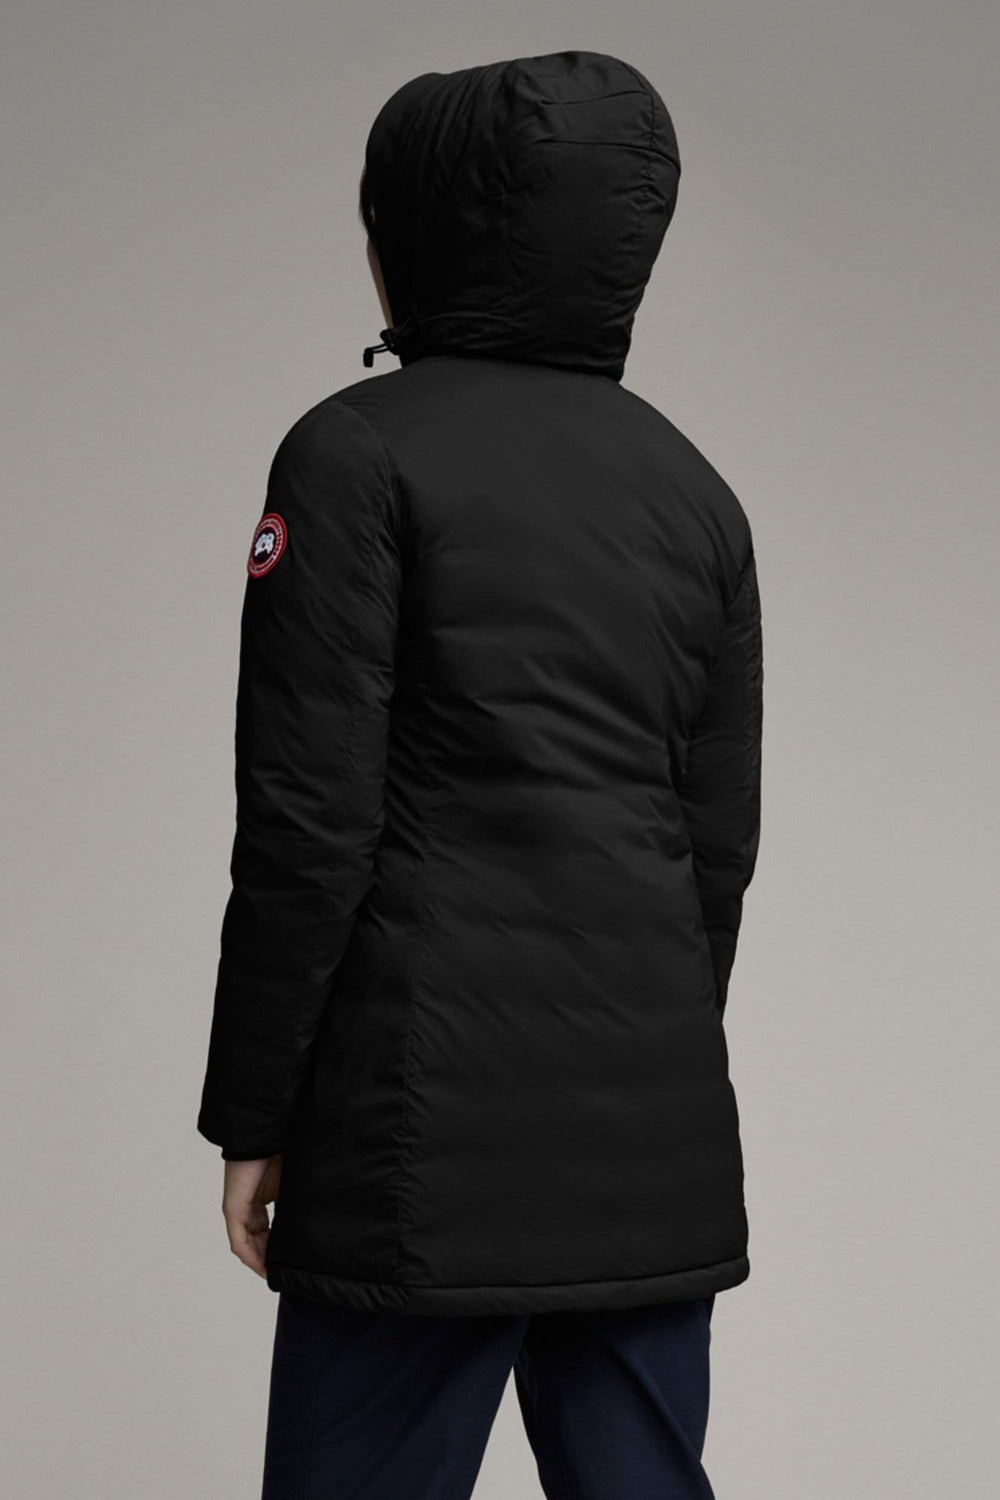 Canada Goose Women's Camp Hooded Jacket - Matte Finish